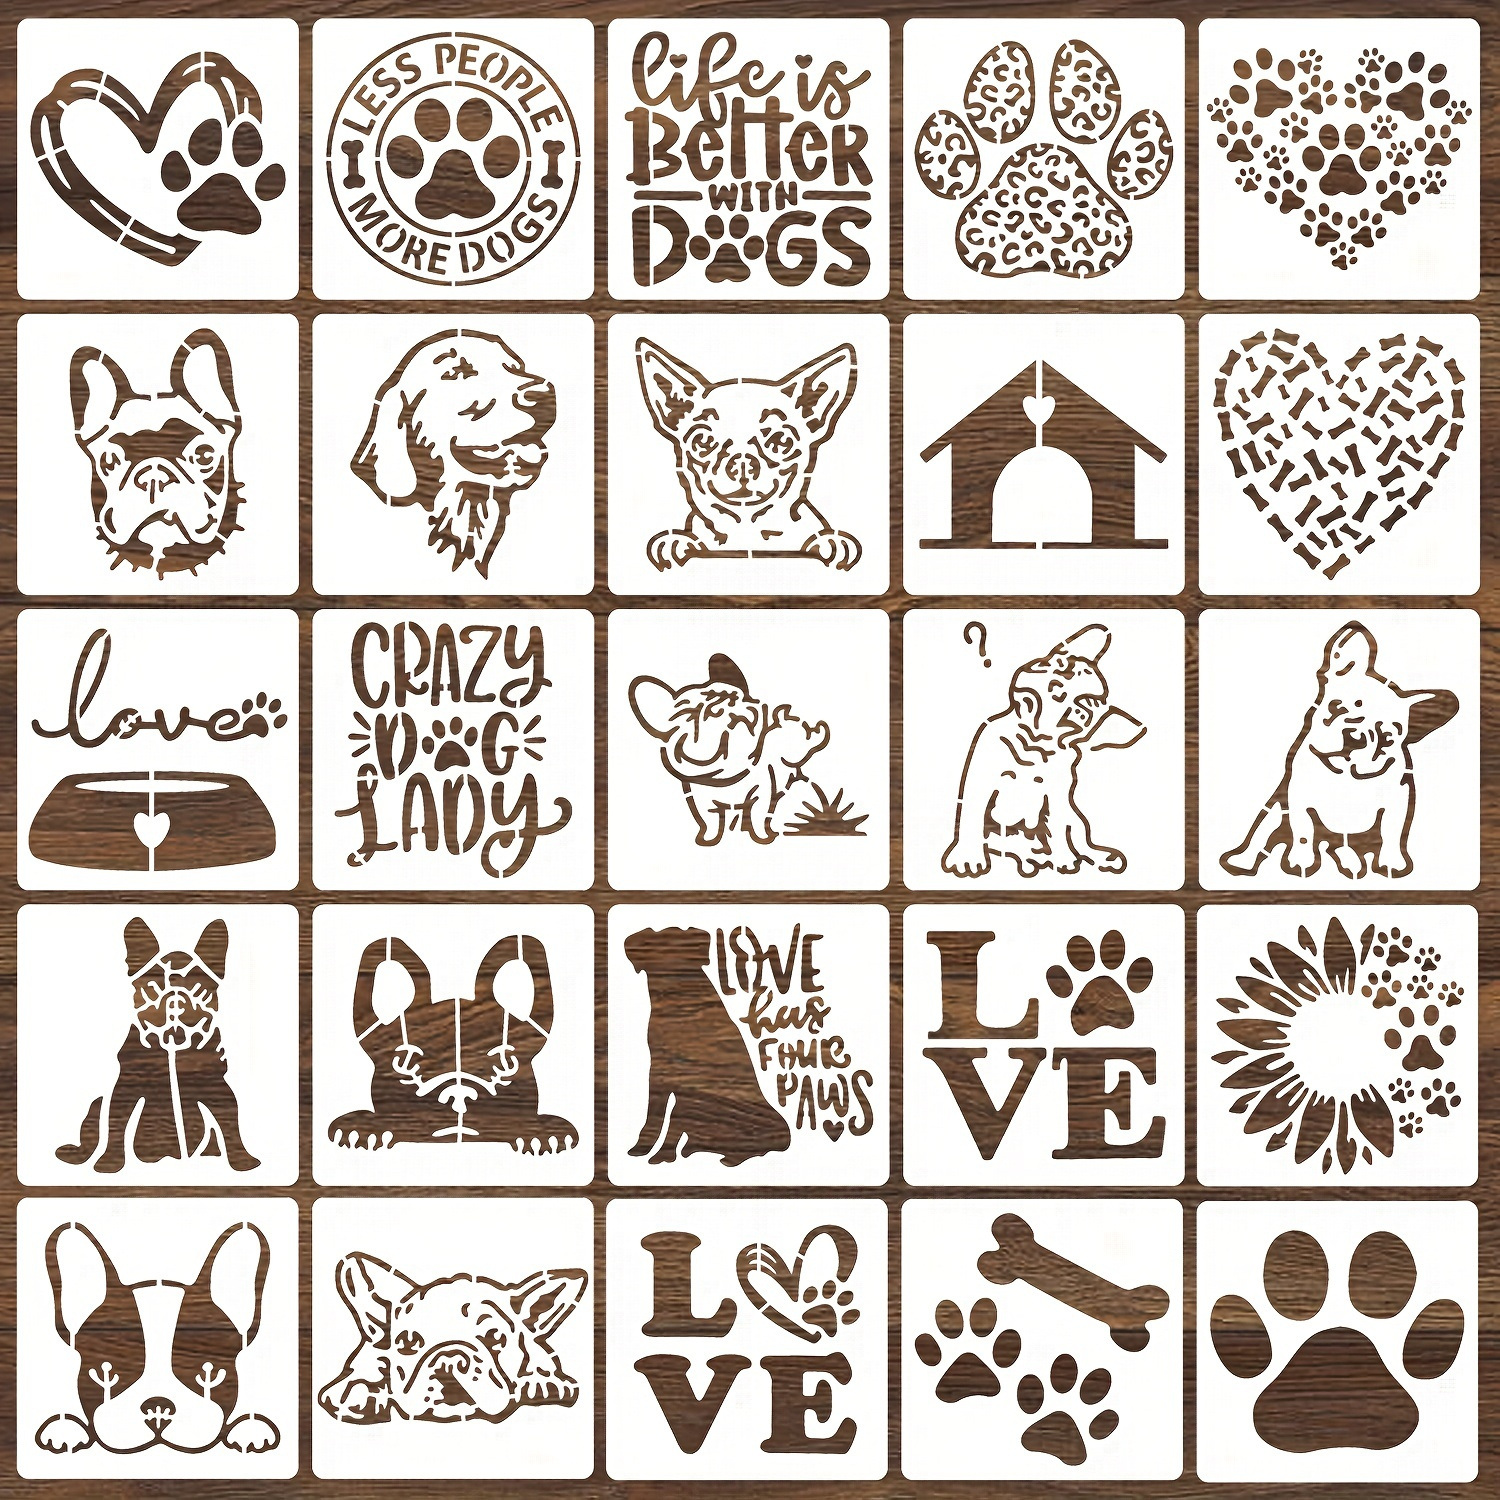 

25pcs Dog Stencils For Painting On Wood, Dog Paw Print Stencils Reusable Love Dog Painting Stencil Templates For Diy Crafts Scrapbooks Wood Home Supplies